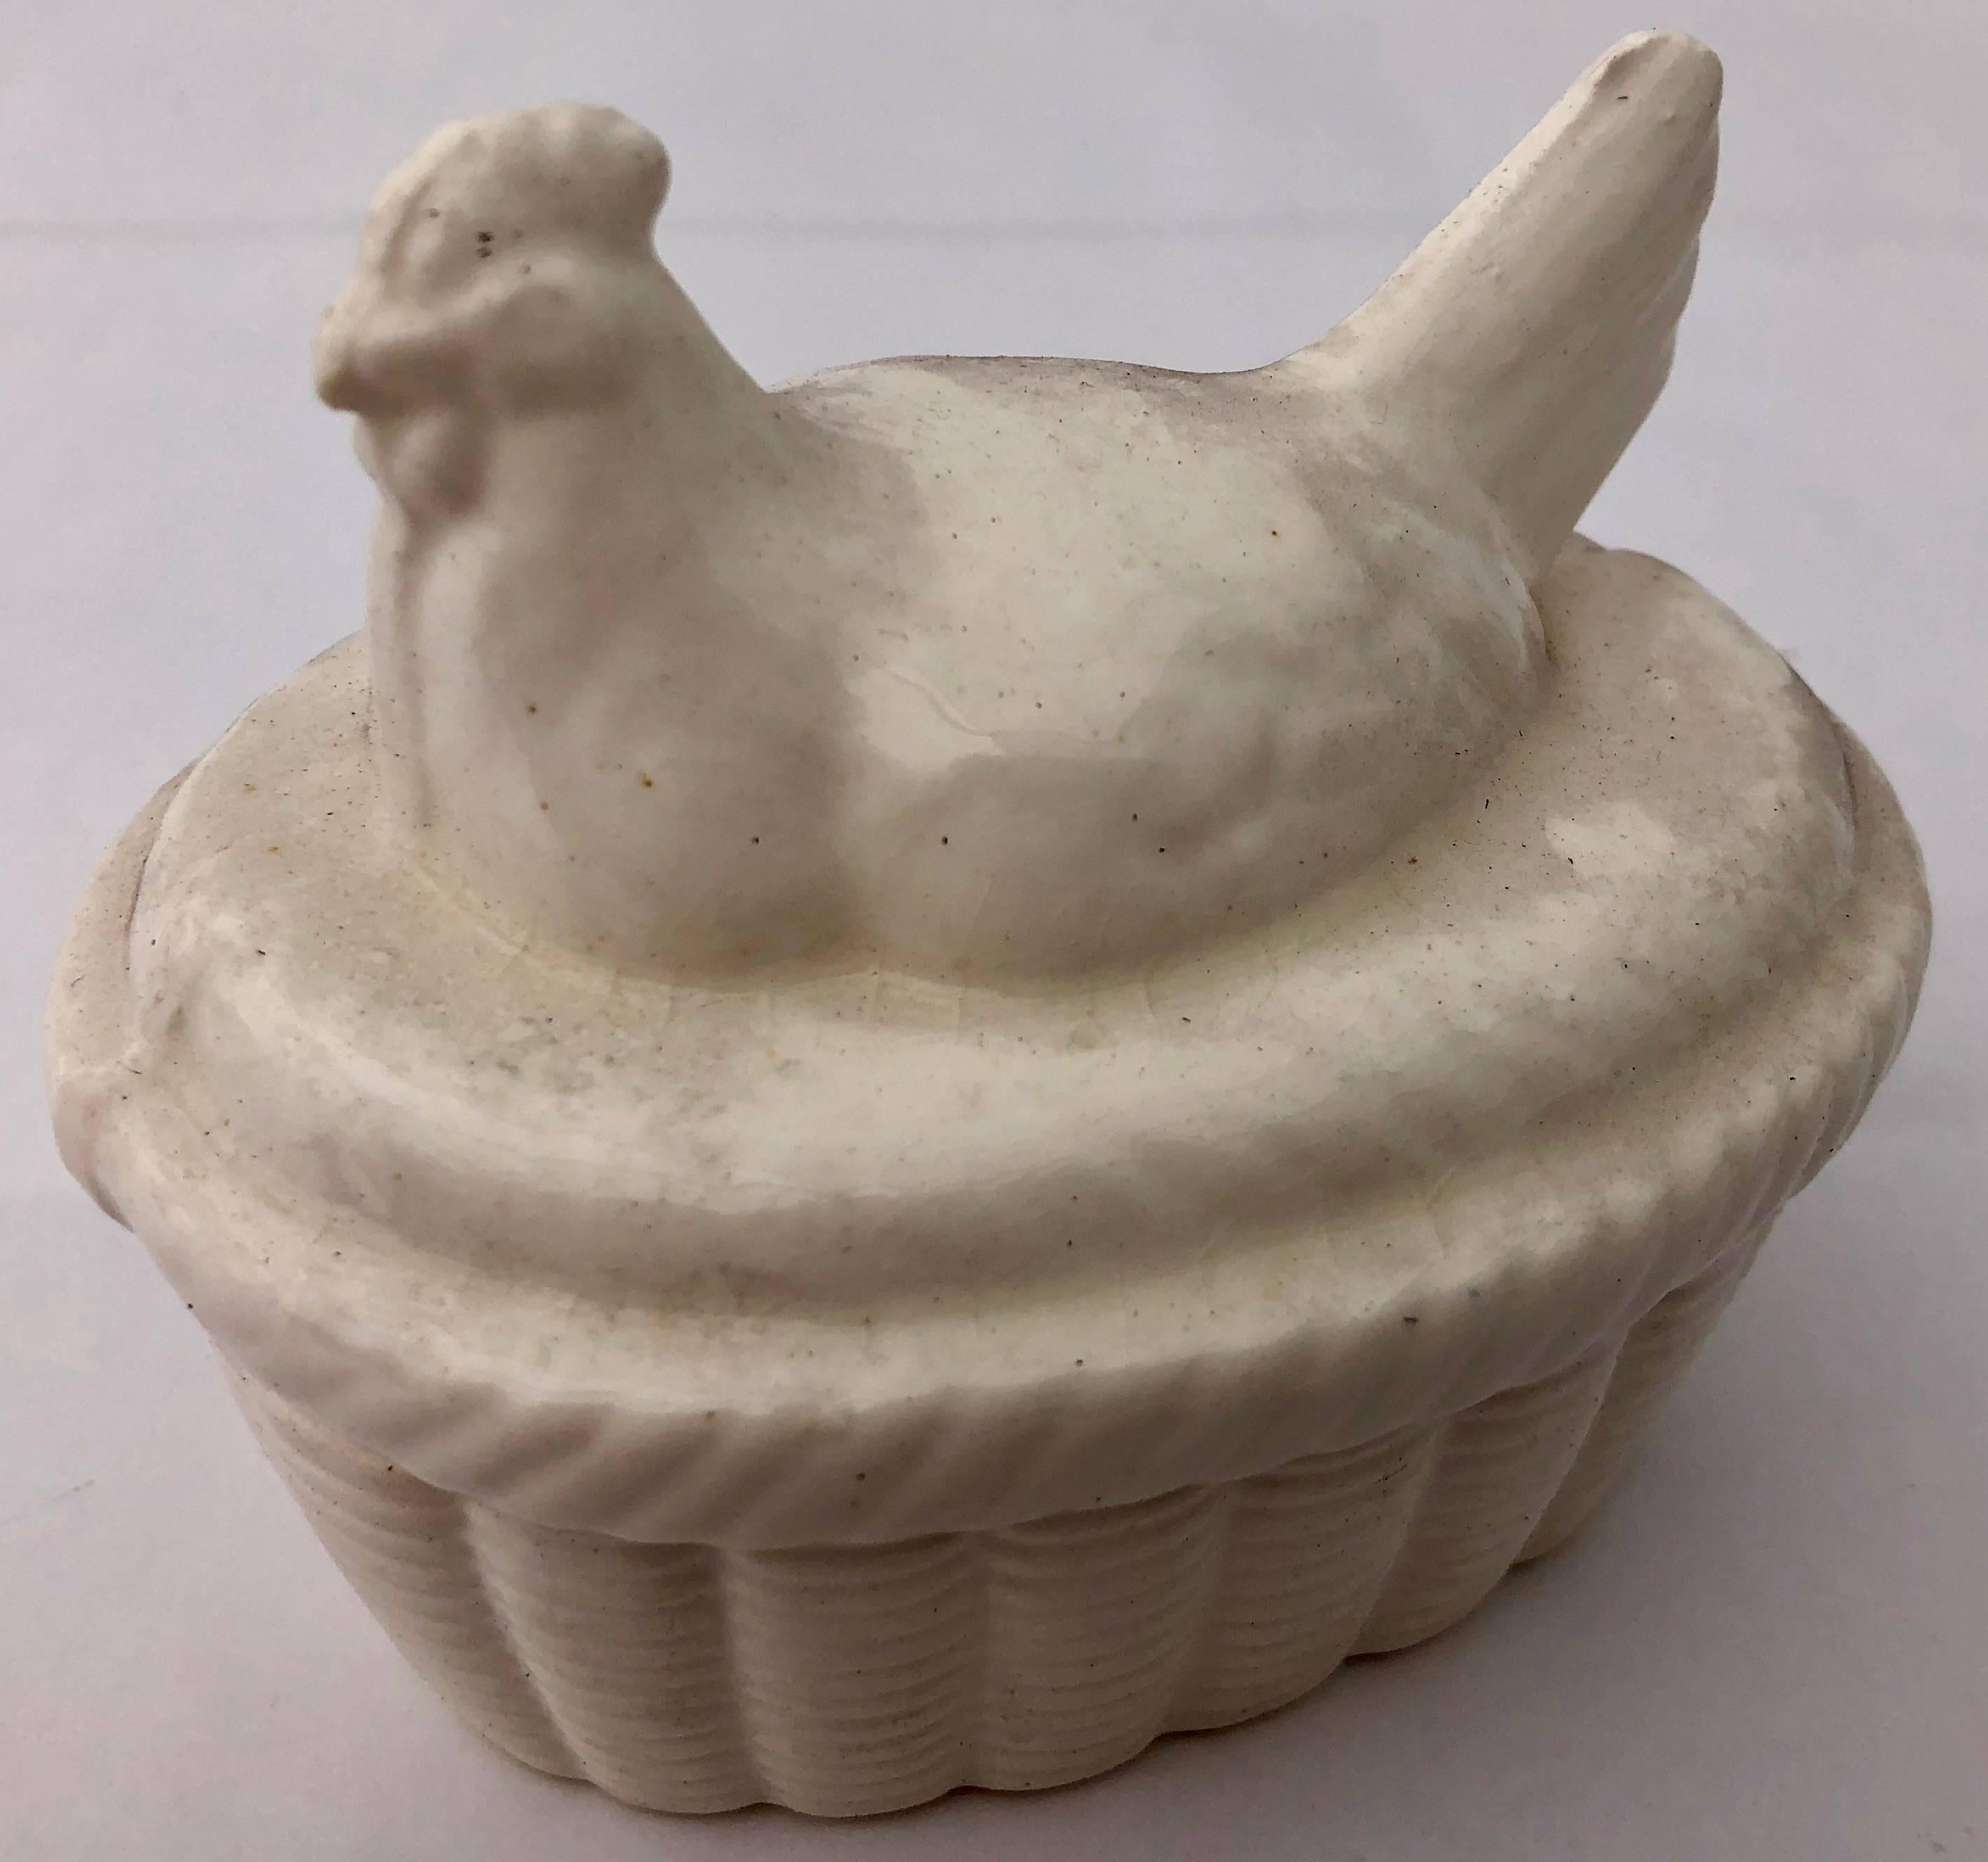 This is a handcrafted ceramic two-piece white chicken box was made in Japan in the 1980s. It was purchased for a French restaurant, but never used. It is oven safe, but could be used for any number of uses in and out of the kitchen. It comes in it's